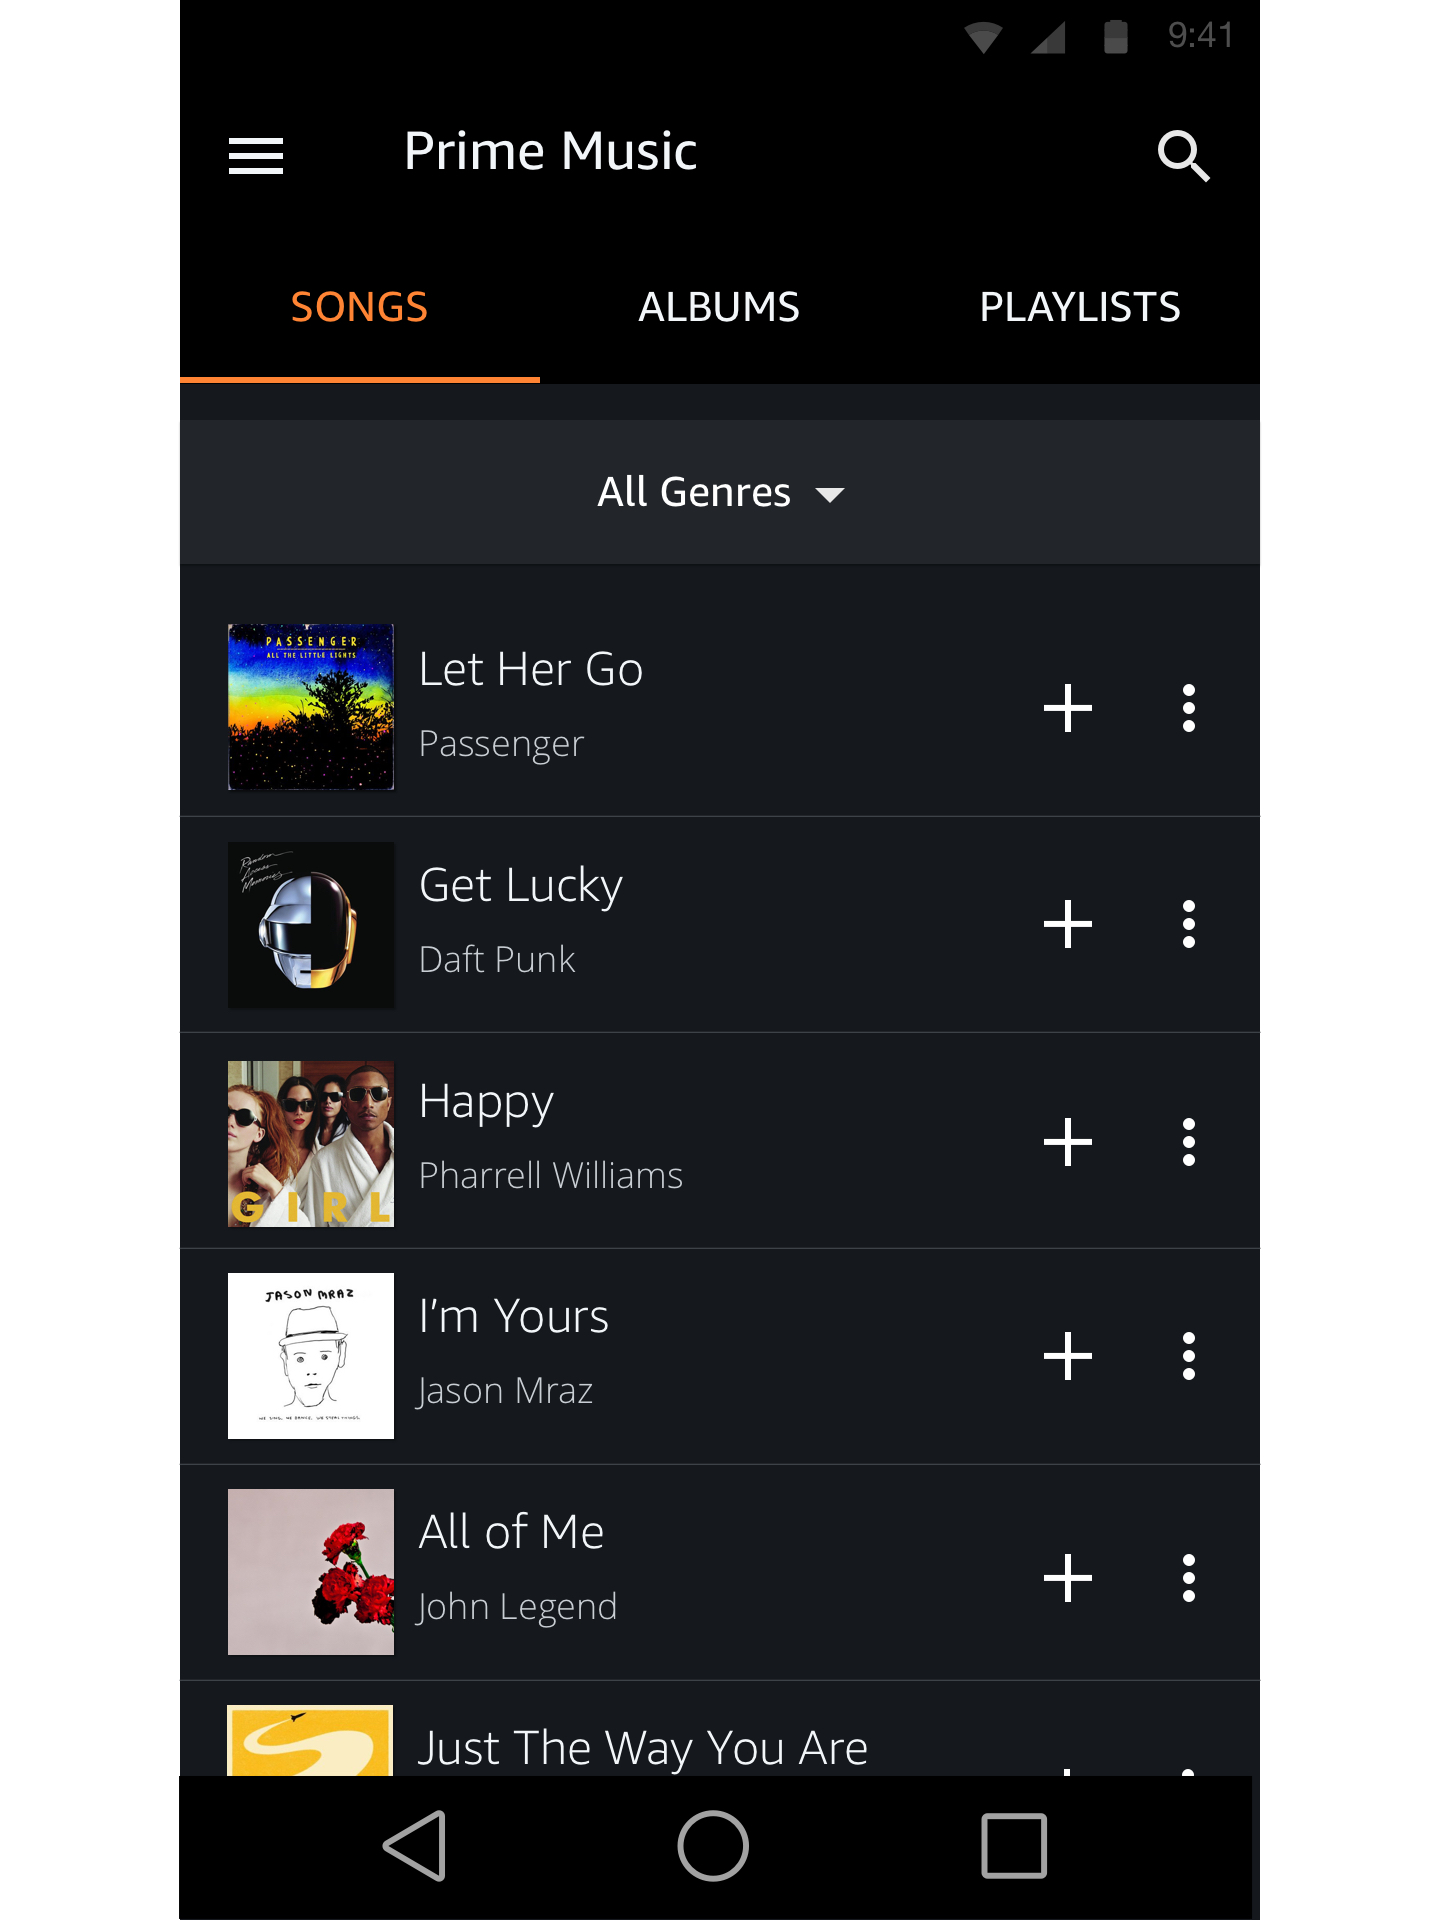 Android phone showing Prime Music screen. The three tabs are songs, albums and playlists. The active tab is the song tab which shows the most popular songs in Prime and a '+' sign next to each song. These songs are 'Let her Go' by Passenger, 'Get Lucky' by Daft Punk, 'Happy' by Pharell Williams, 'Im Yours' by Jason Mraz, 'All of Me' by John Legend and 'Just the Way You Are' by Bruno Mars.